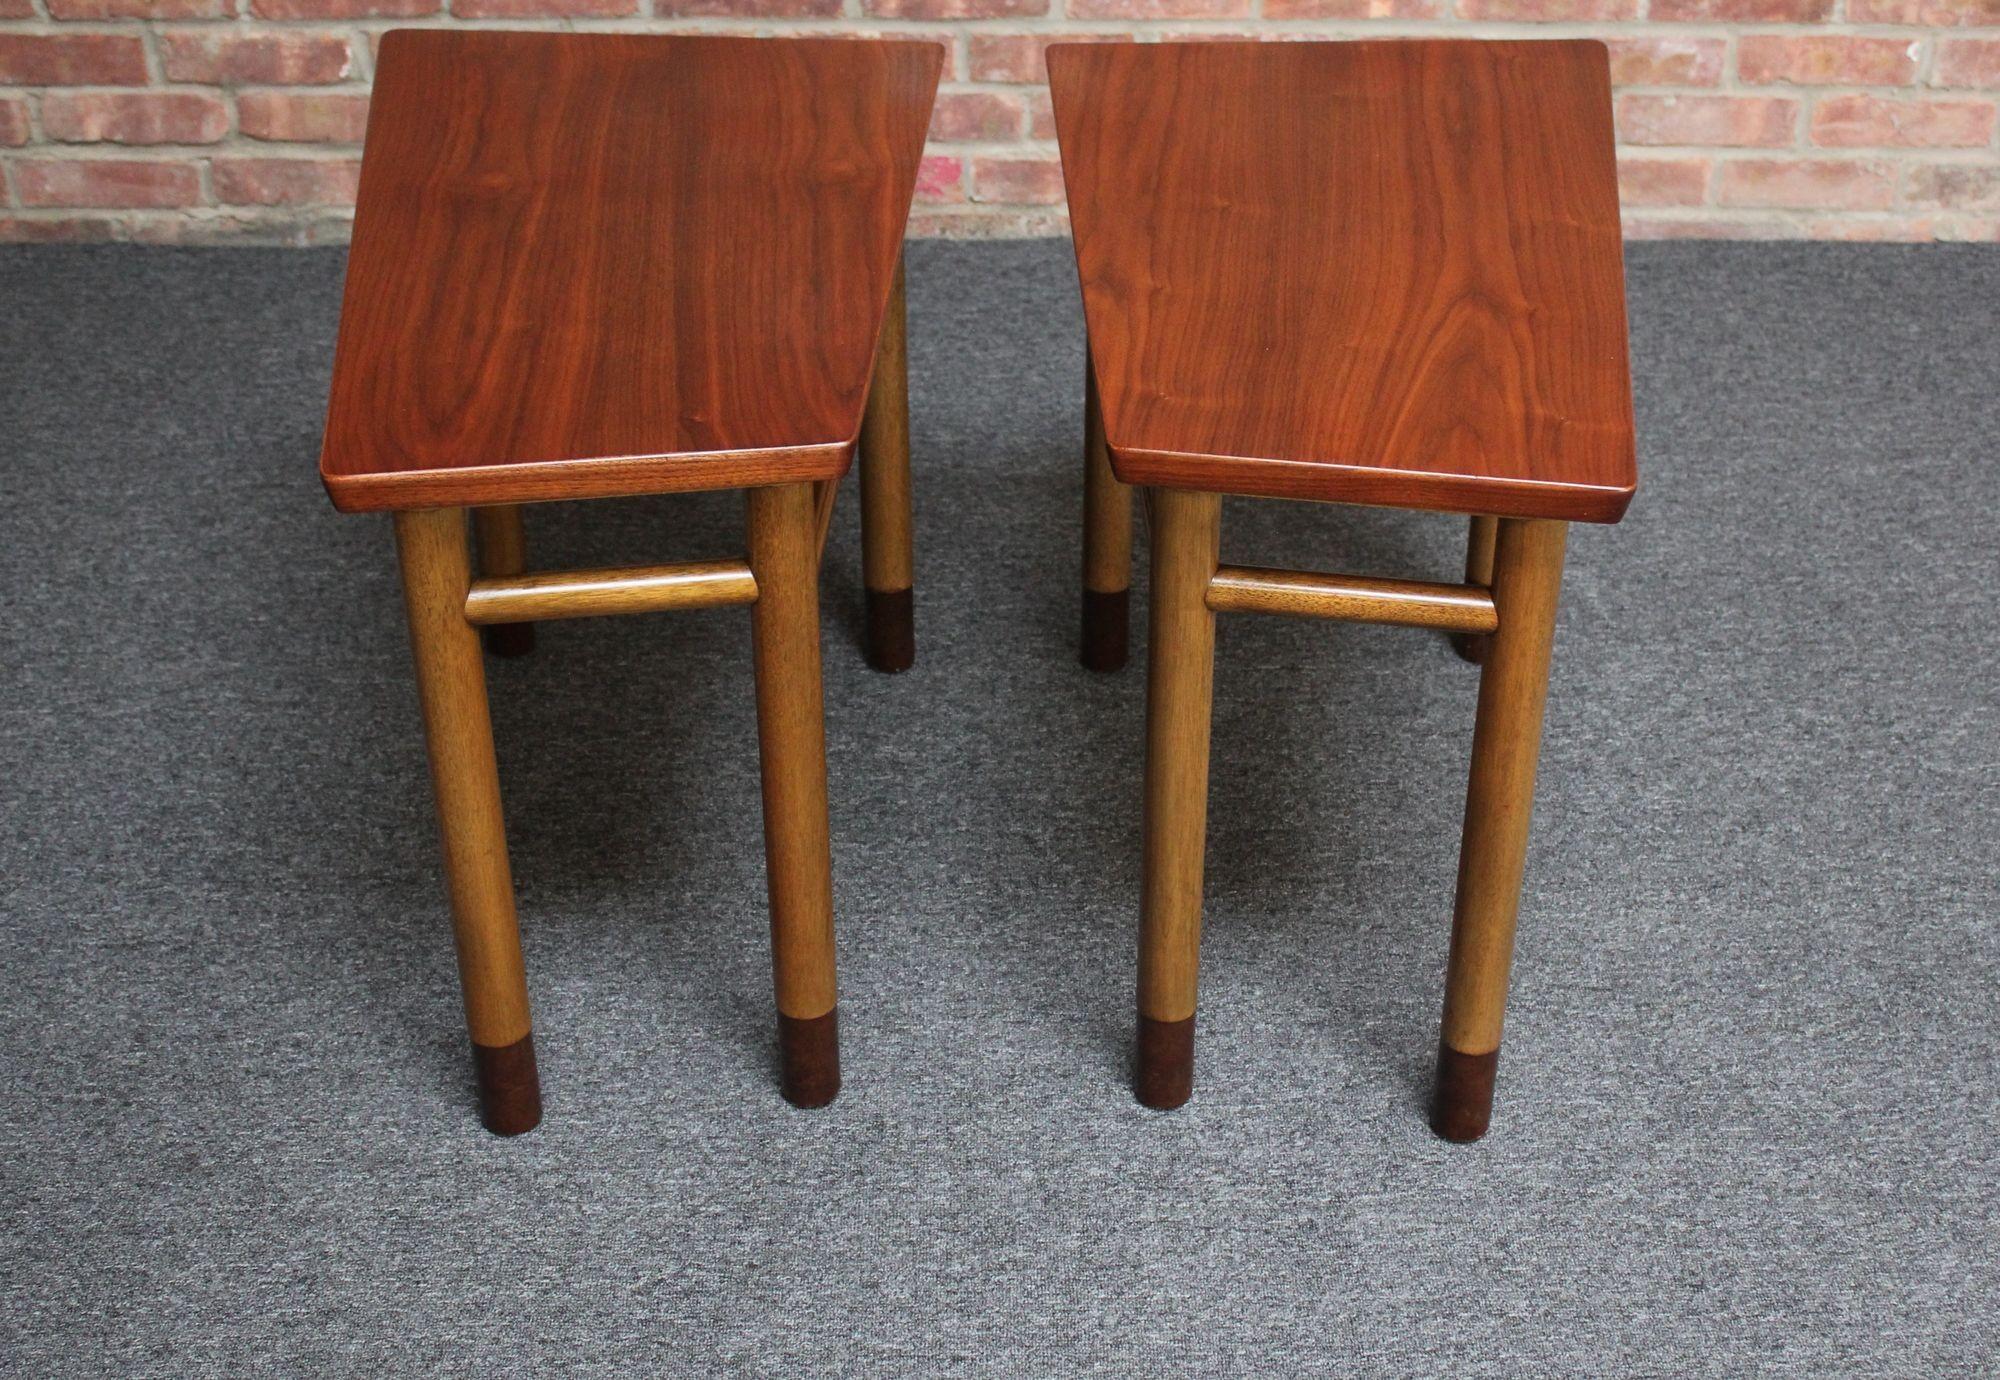 Pair of Mid-Century Walnut, Leather and Mahogany Wedge End Tables by Dunbar In Good Condition For Sale In Brooklyn, NY